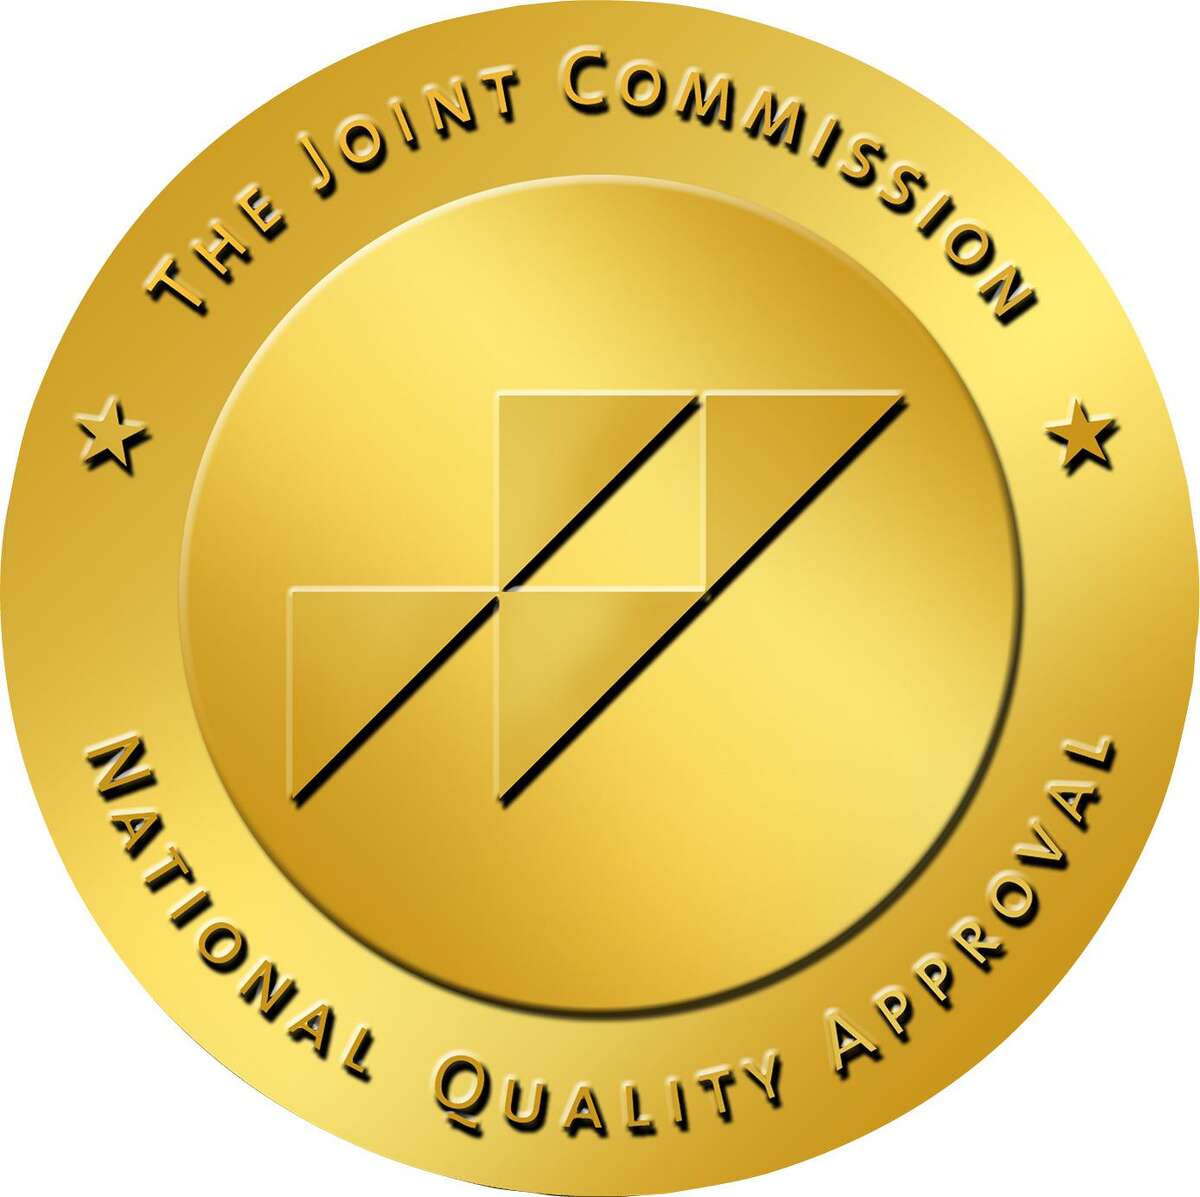 Griffin Health earned The Joint Commission’s Gold Seal of Approval® for Hospital and Behavioral Health Care Accreditation, reflecting its commitment to providing safe and quality patient care.